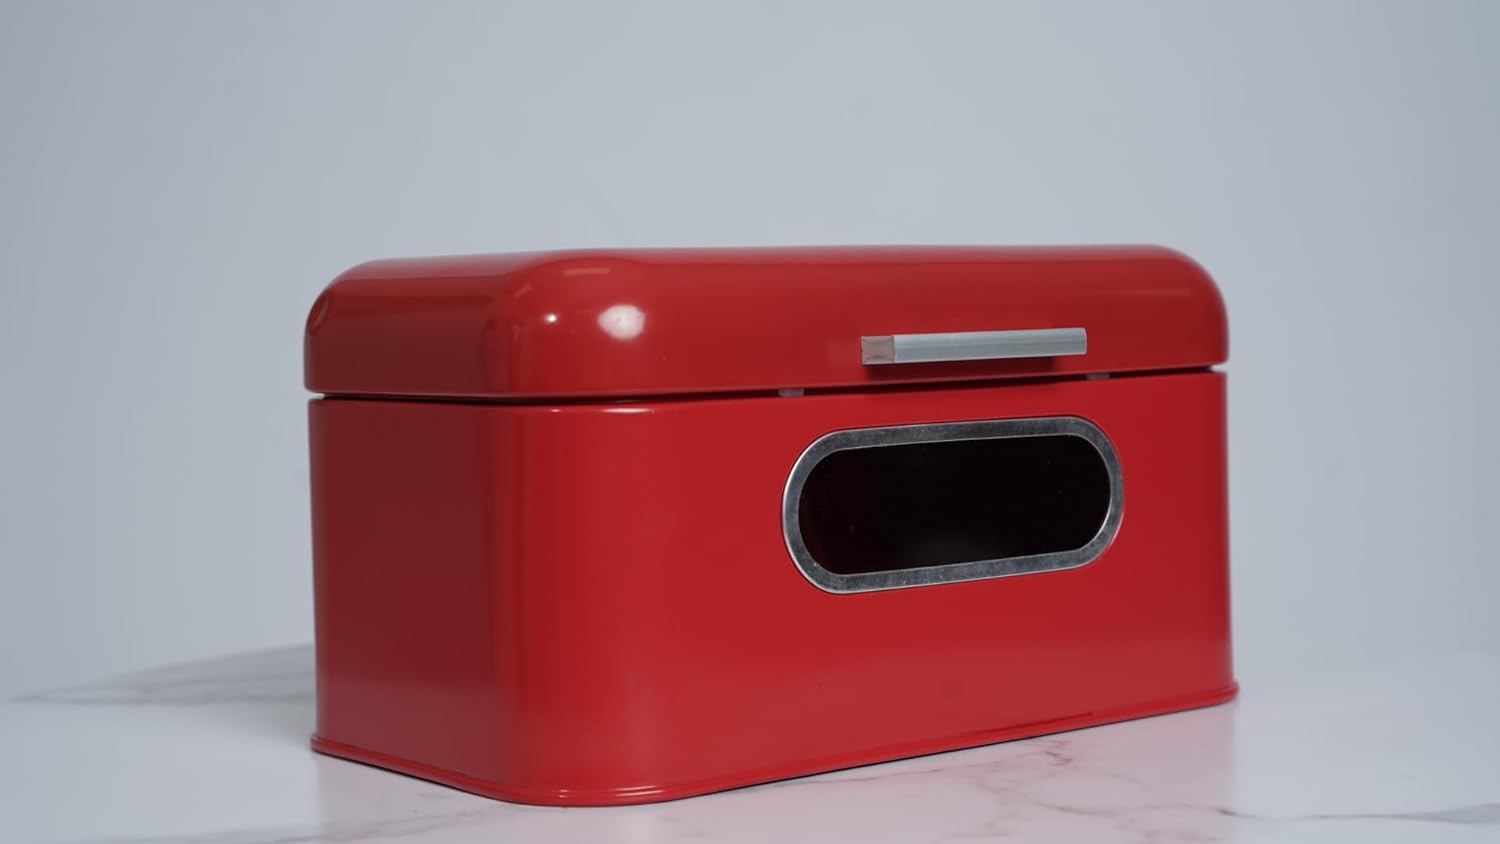 Red Metal Bread Box with Lid and Transparent Window, 11.8" - 2